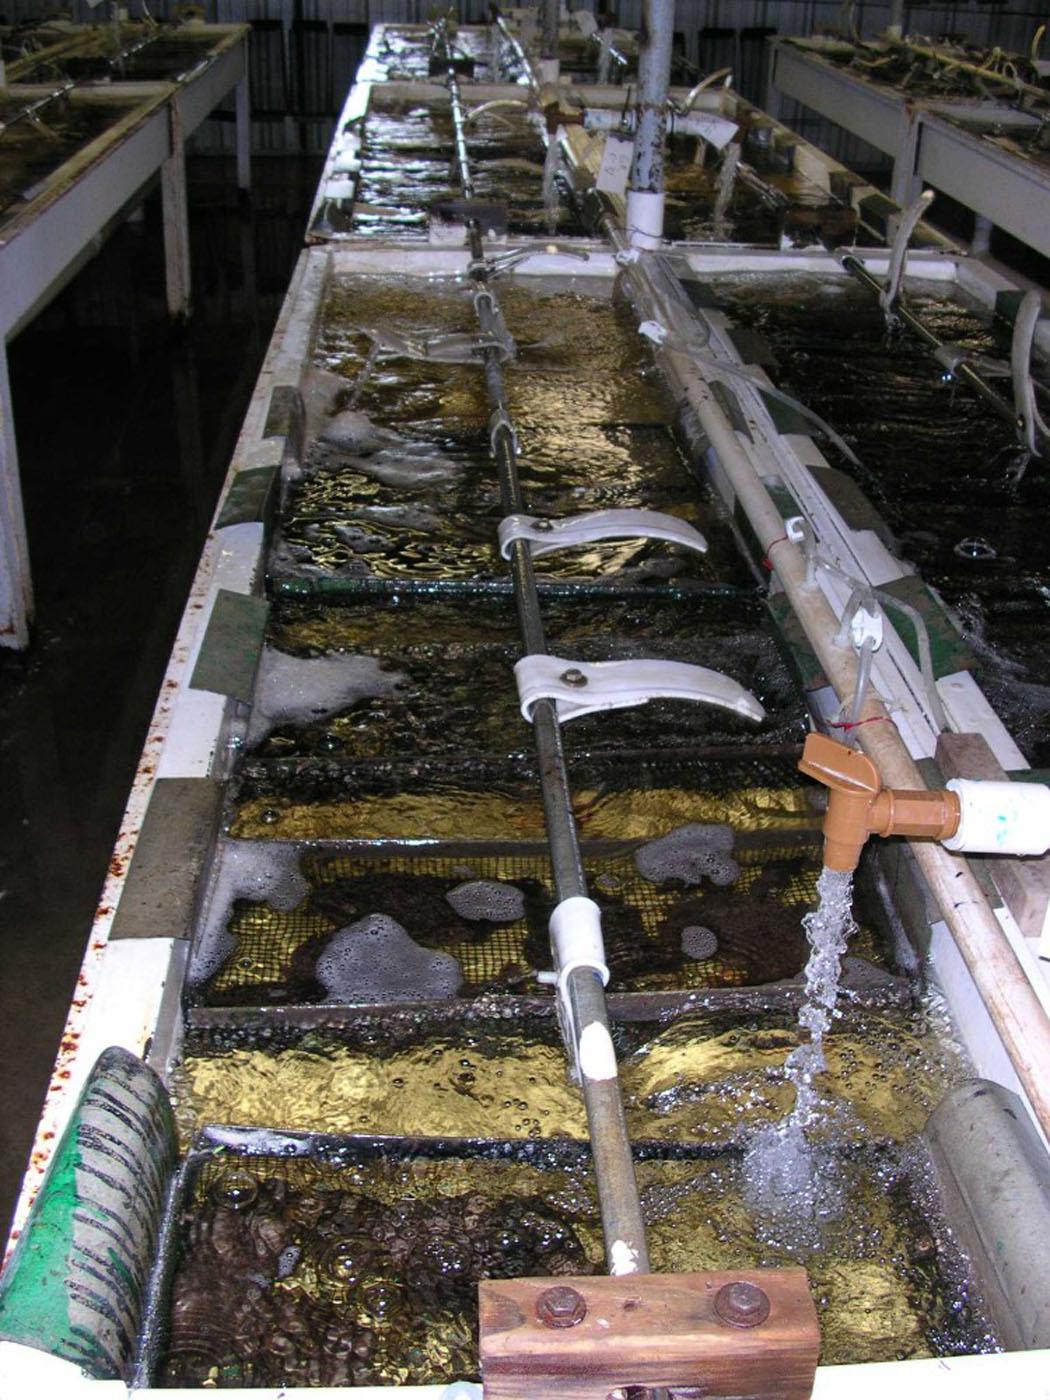 Plastic paddles, designed by catfish hatchery owner Jerry Nobile of Sunflower County, can be stopped by hand and are a safer alternative to those made from metal that typically are used in hatcheries. The white paddles, which circulate water and provide oxygen to the catfish, are cut from thick plastic barrels and bent to fit around the rod that moves them.